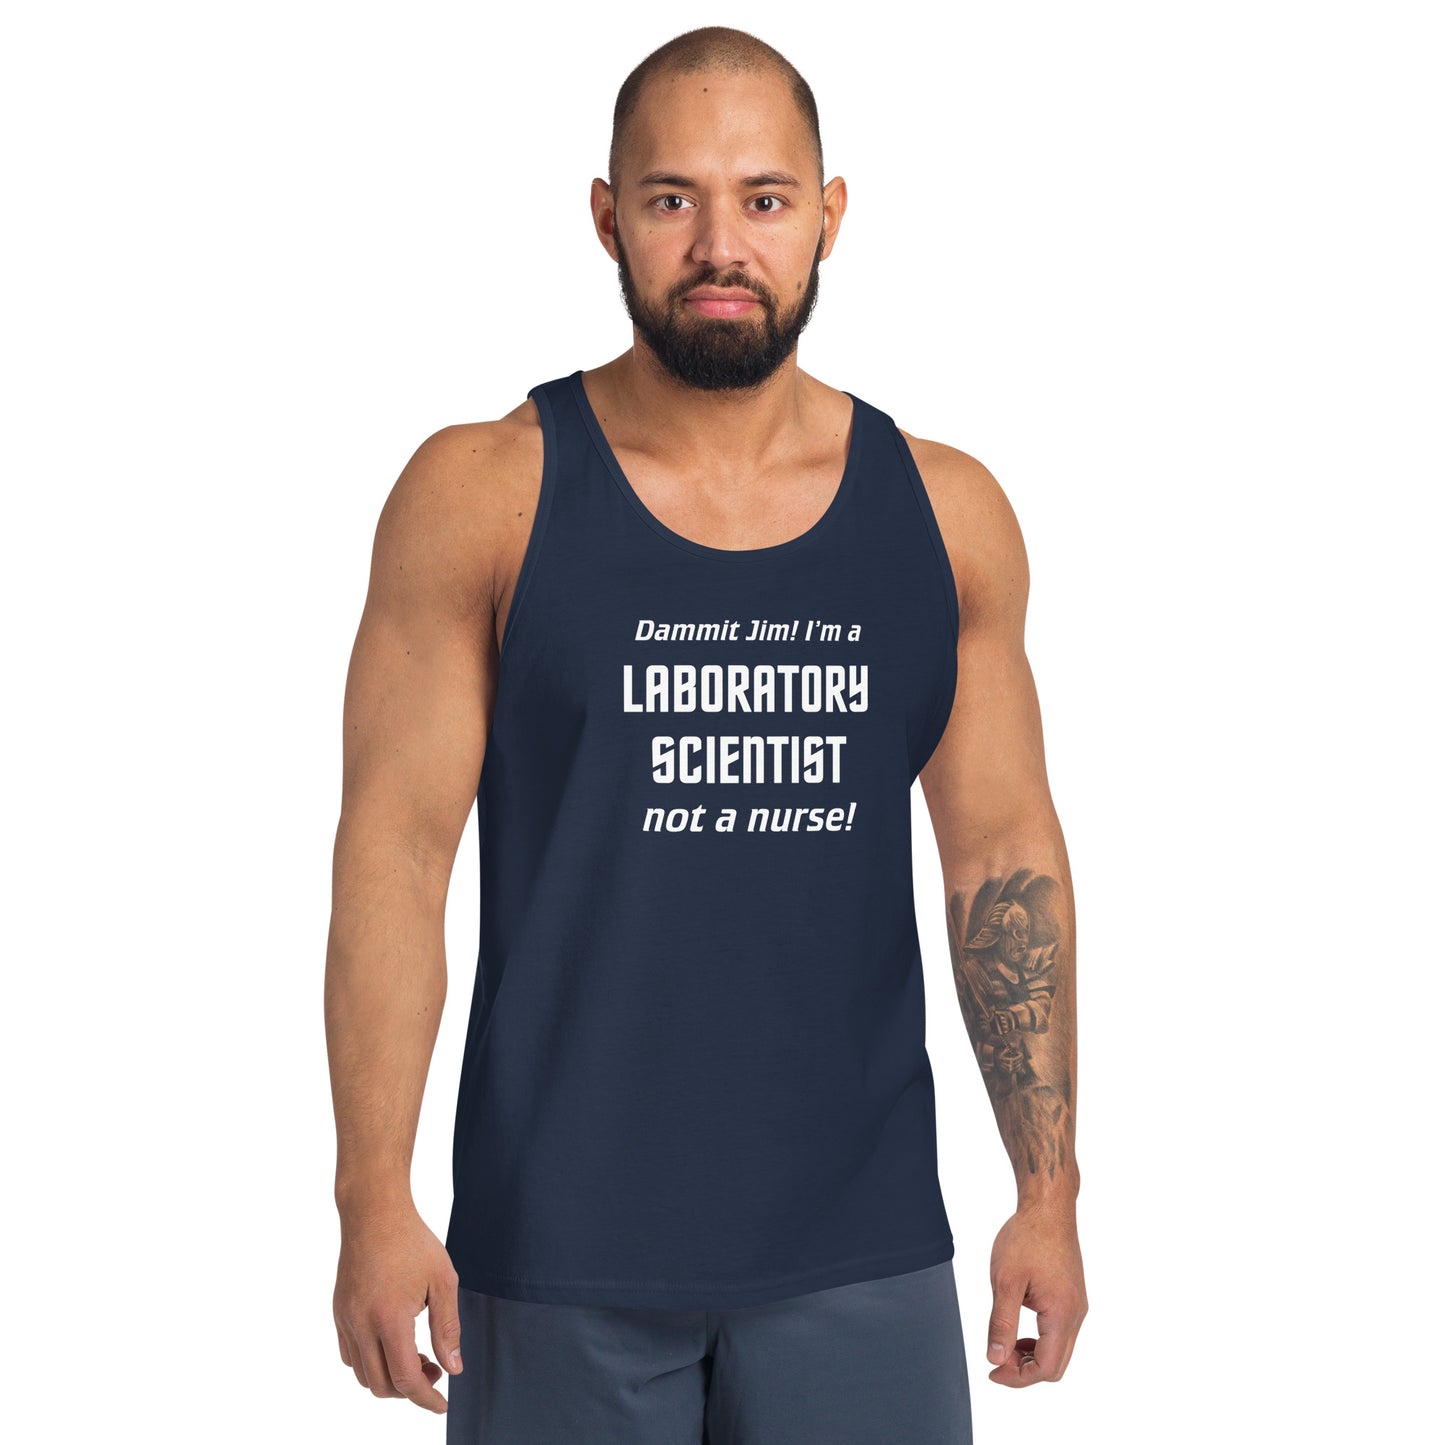 Model wearing Navy blue unisex tank top with text graphic in Star Trek font: "Dammit Jim! I'm a LABORATORY SCIENTIST not a nurse!"